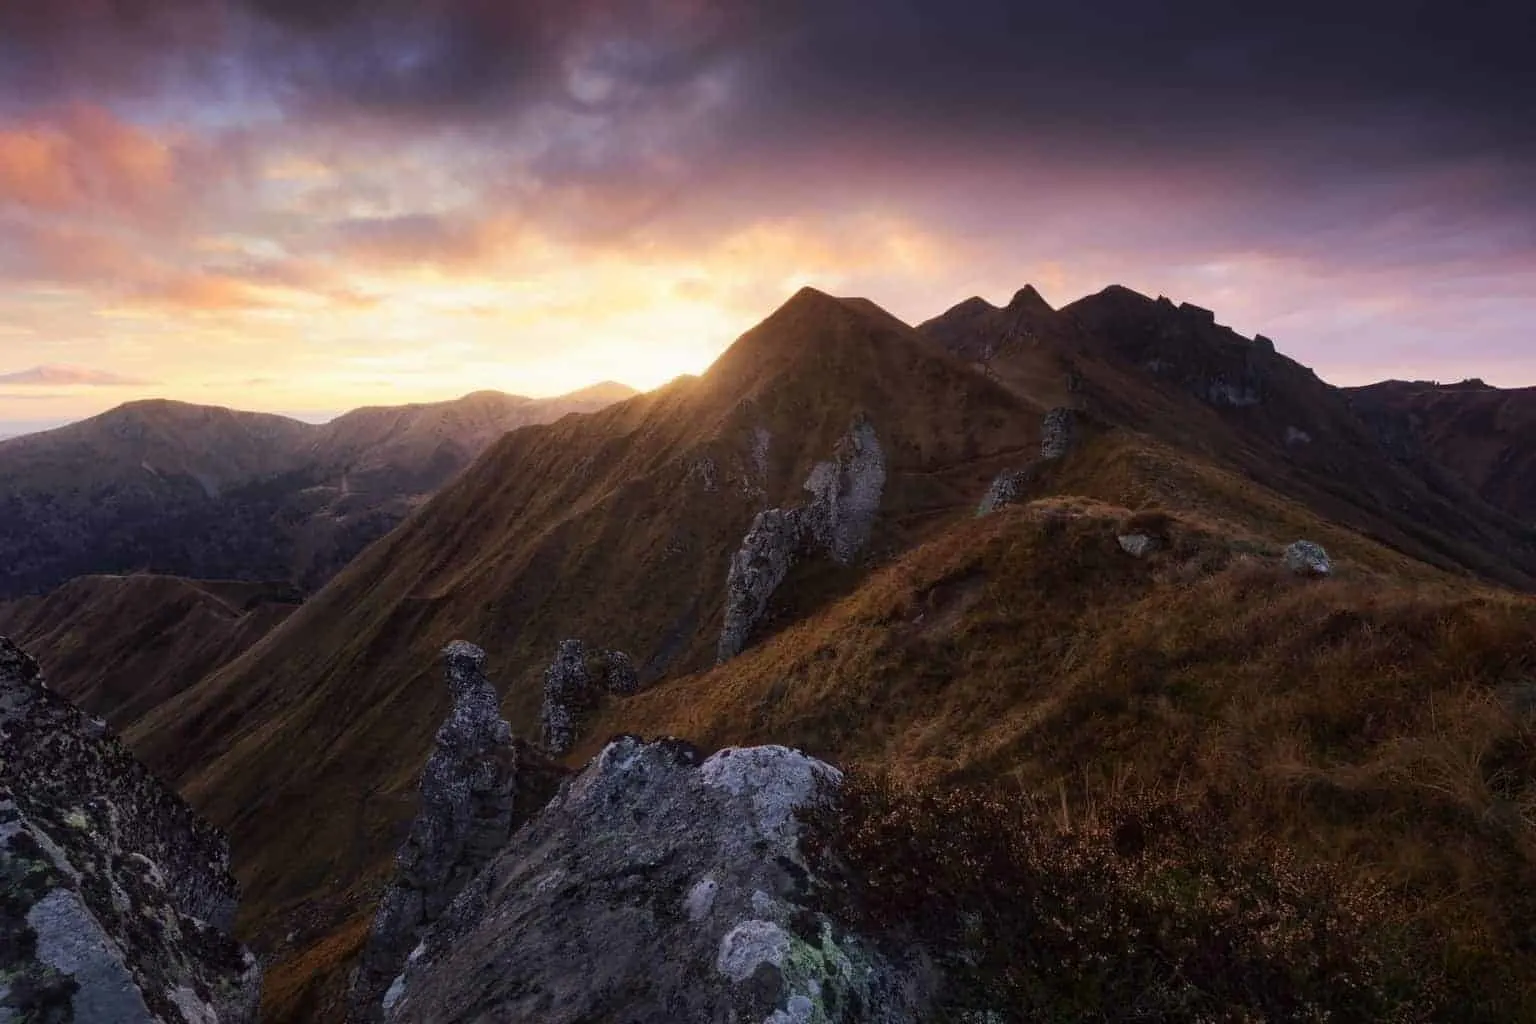 The Massif de Sancy is one of the most incredible hiking trails in Auvergne, France.